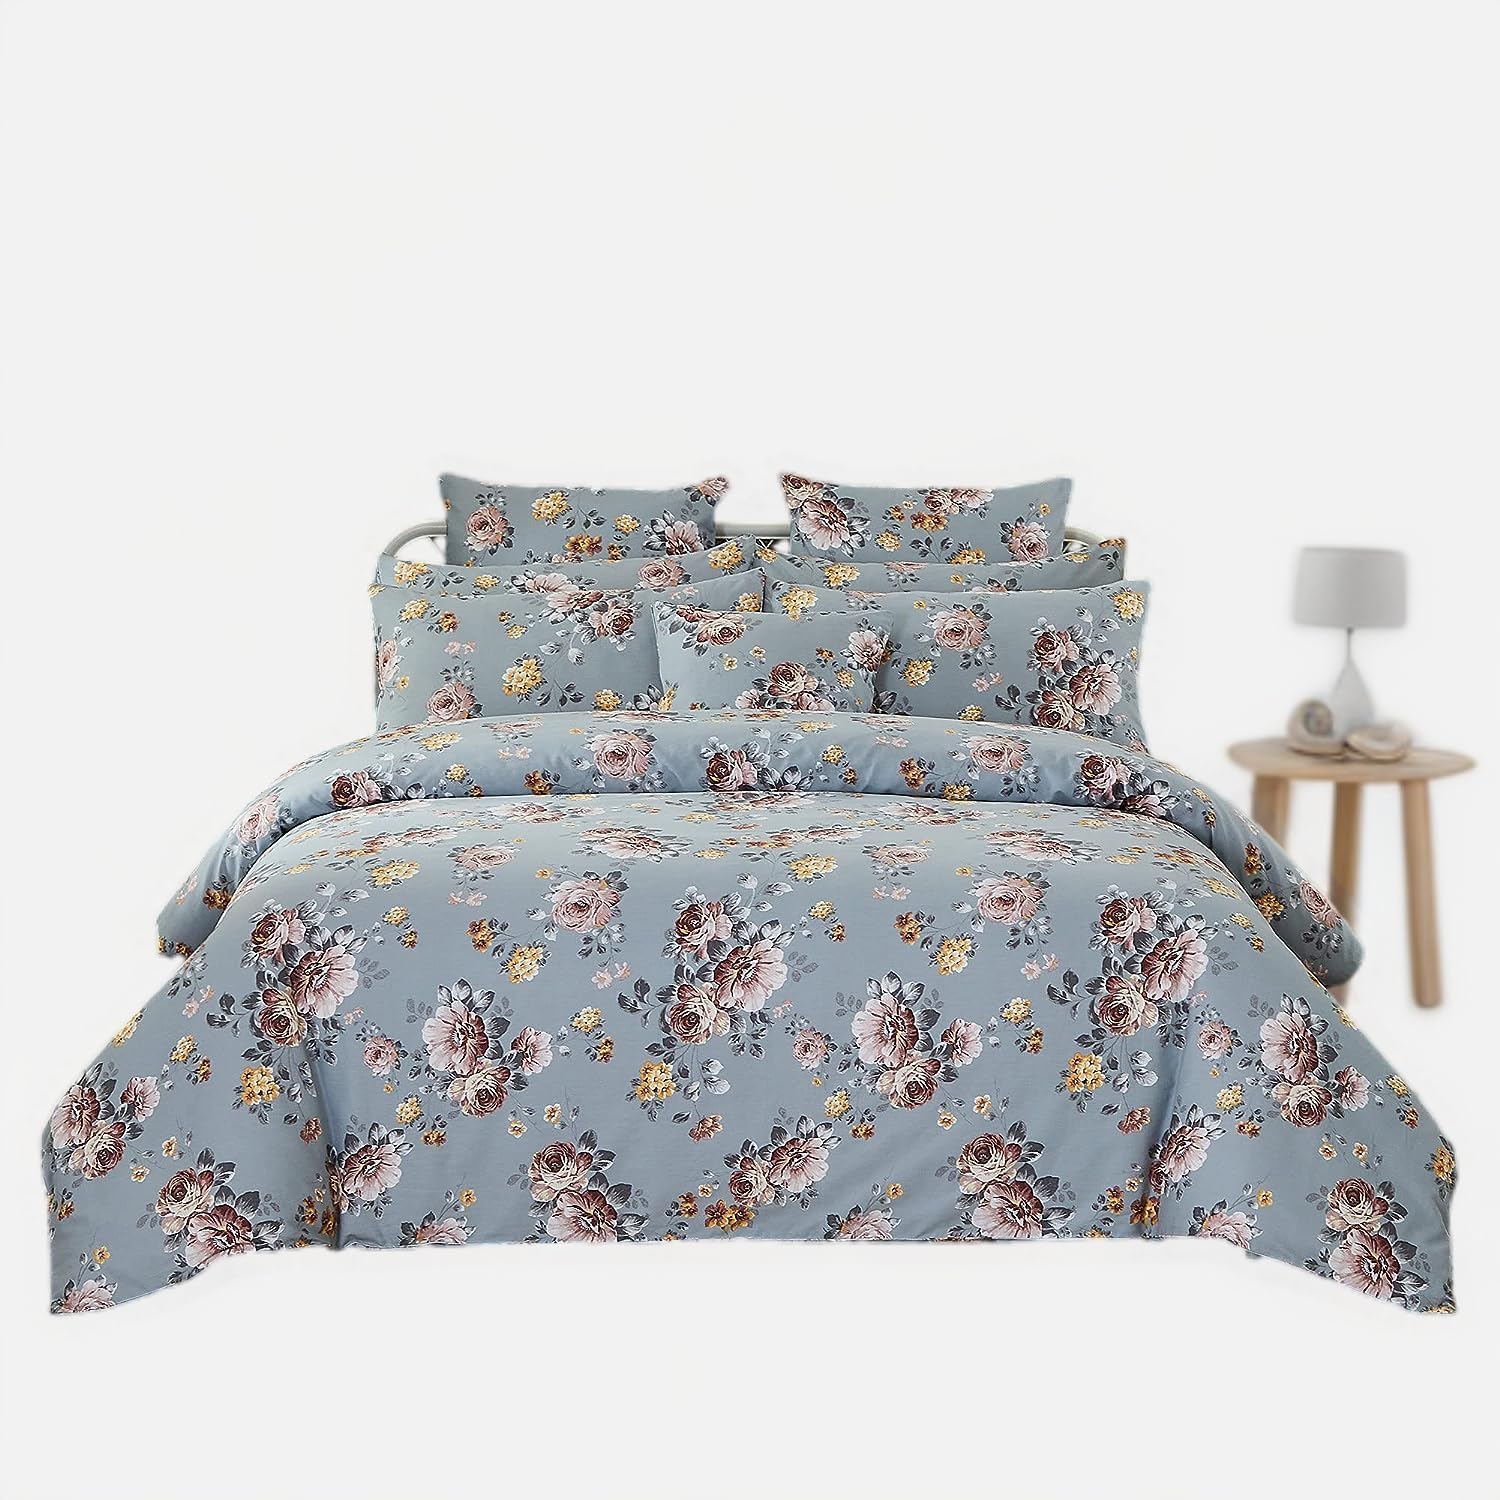 FADFAY Duvet Cover Set Queen Shabby Grey Floral Bedding Vintage Farmhouse Bedding 100% Brushed Cotton Ultra Soft Comforter Cover Set with Zipper Closure 3Pcs, 1duvet Cover & 2pillowcases, Queen Size